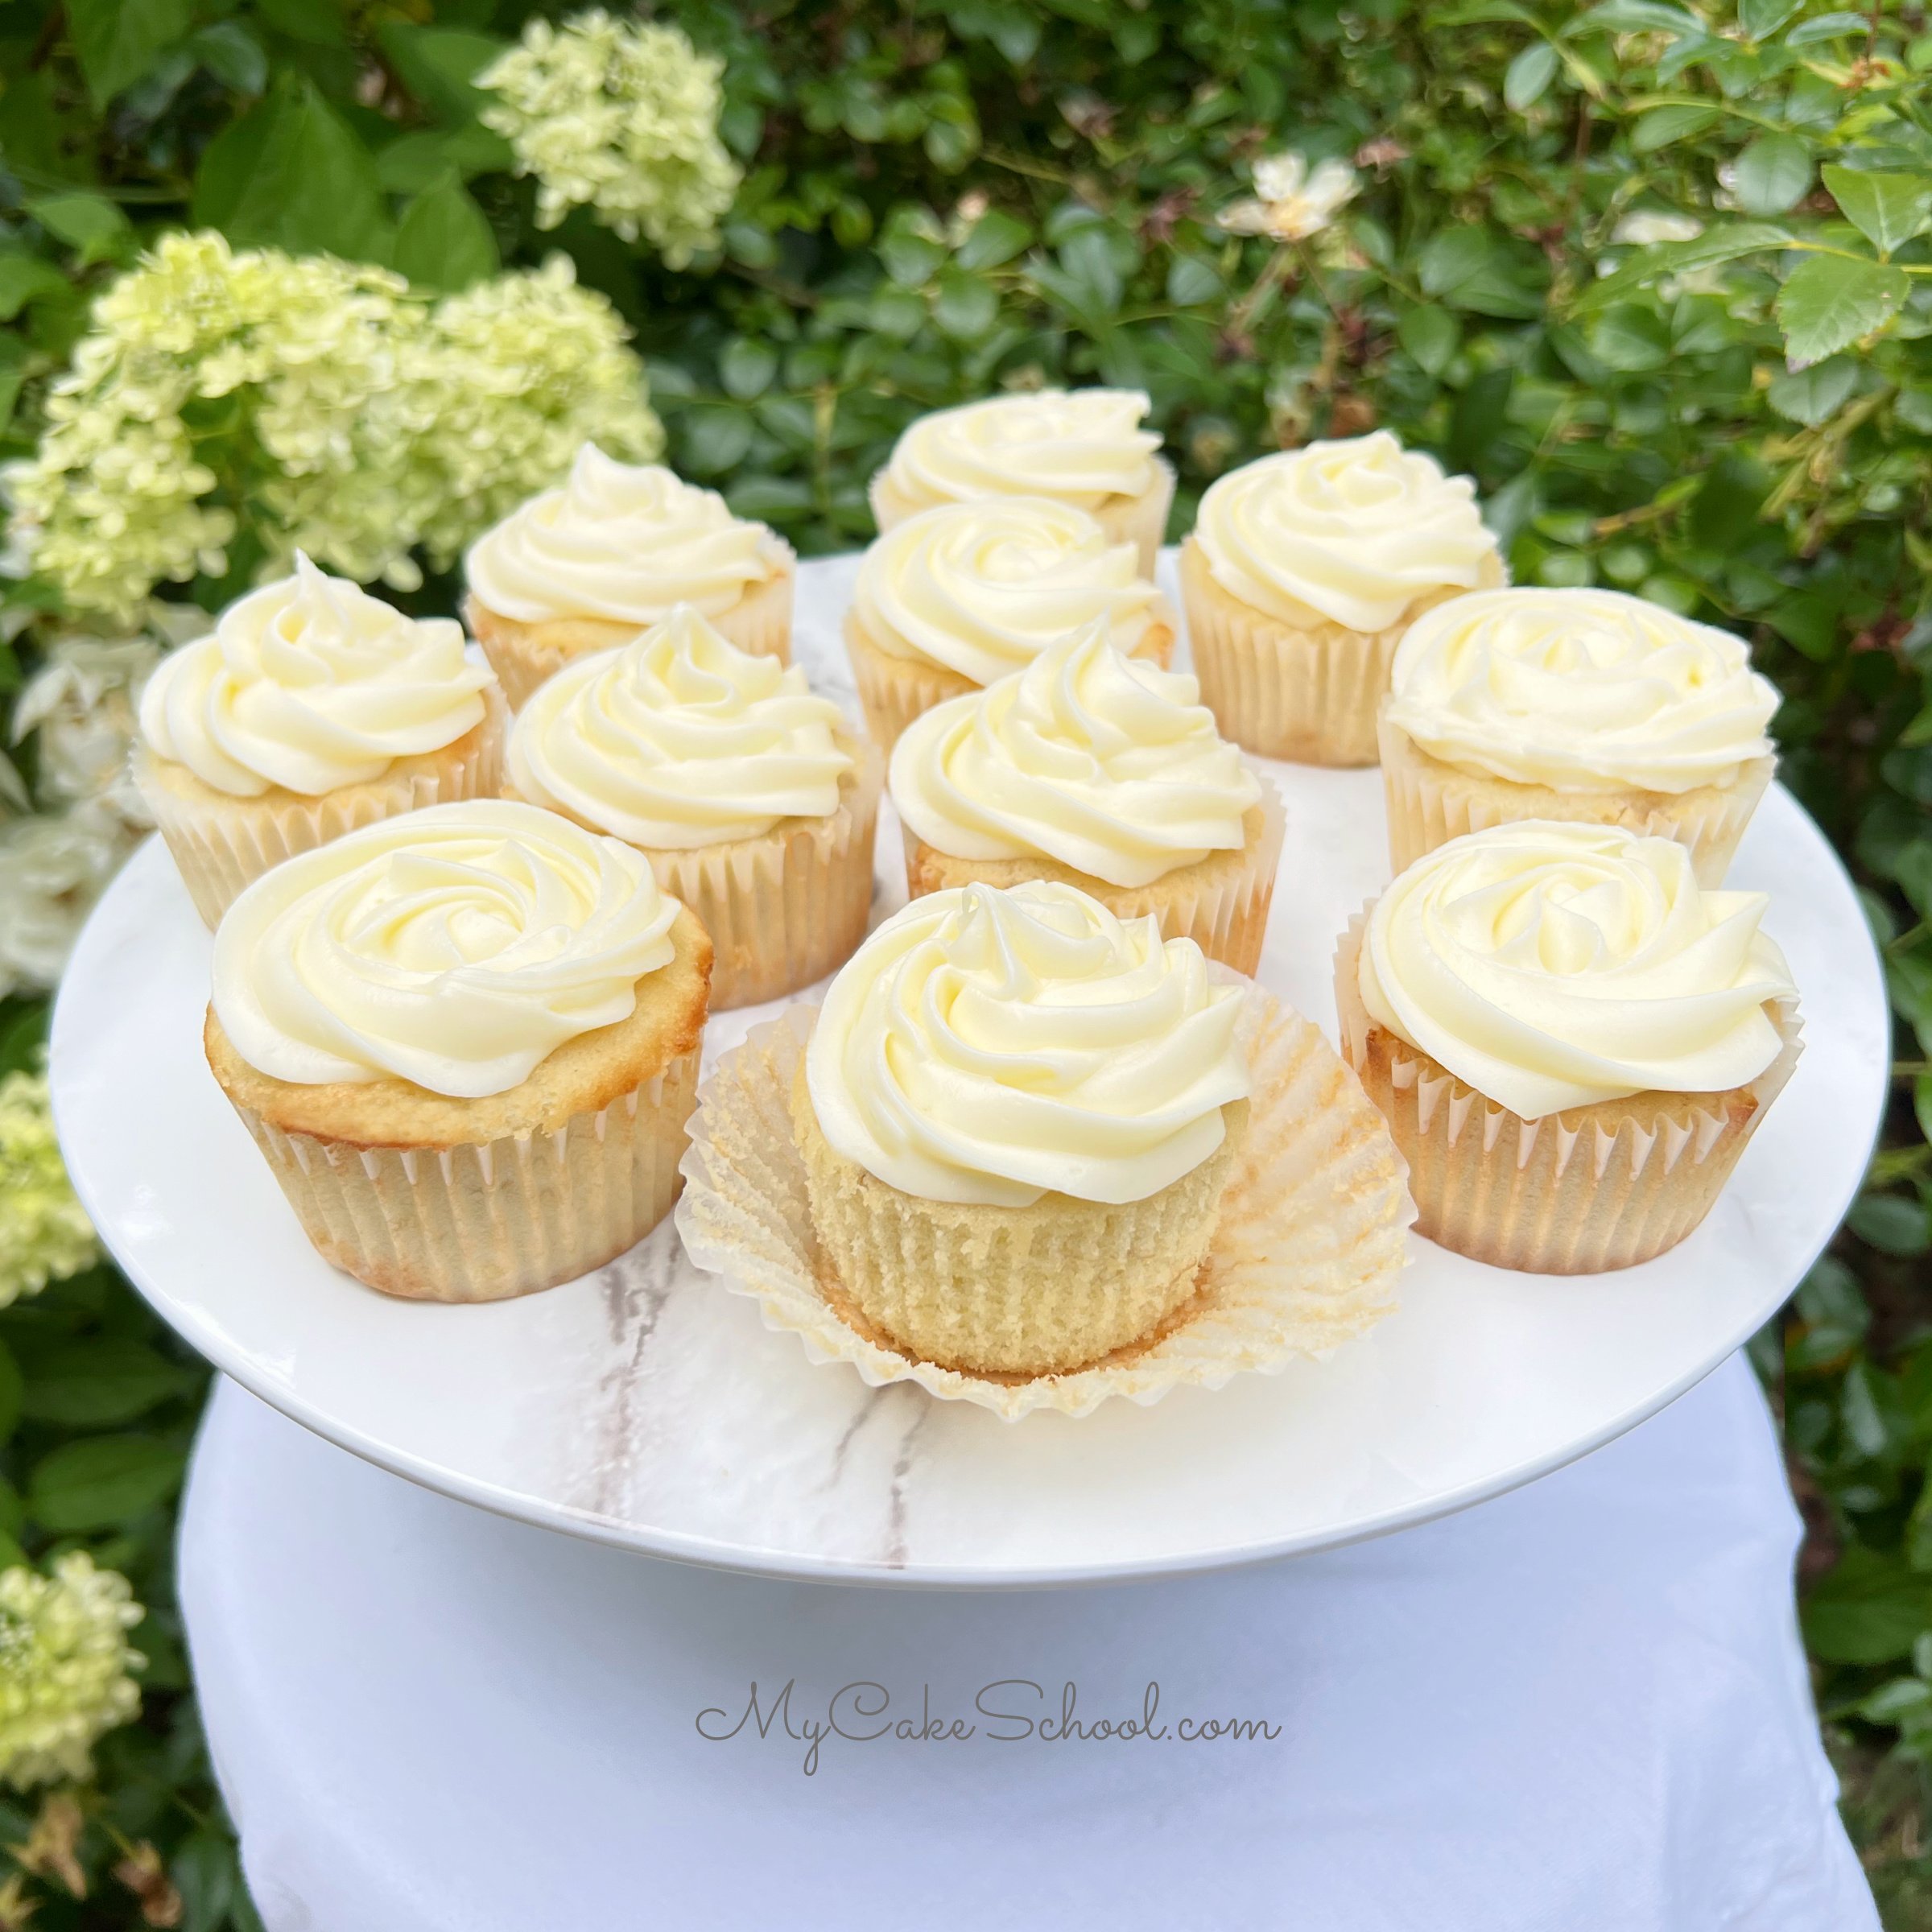 Banana Cupcakes with cream cheese frosting.